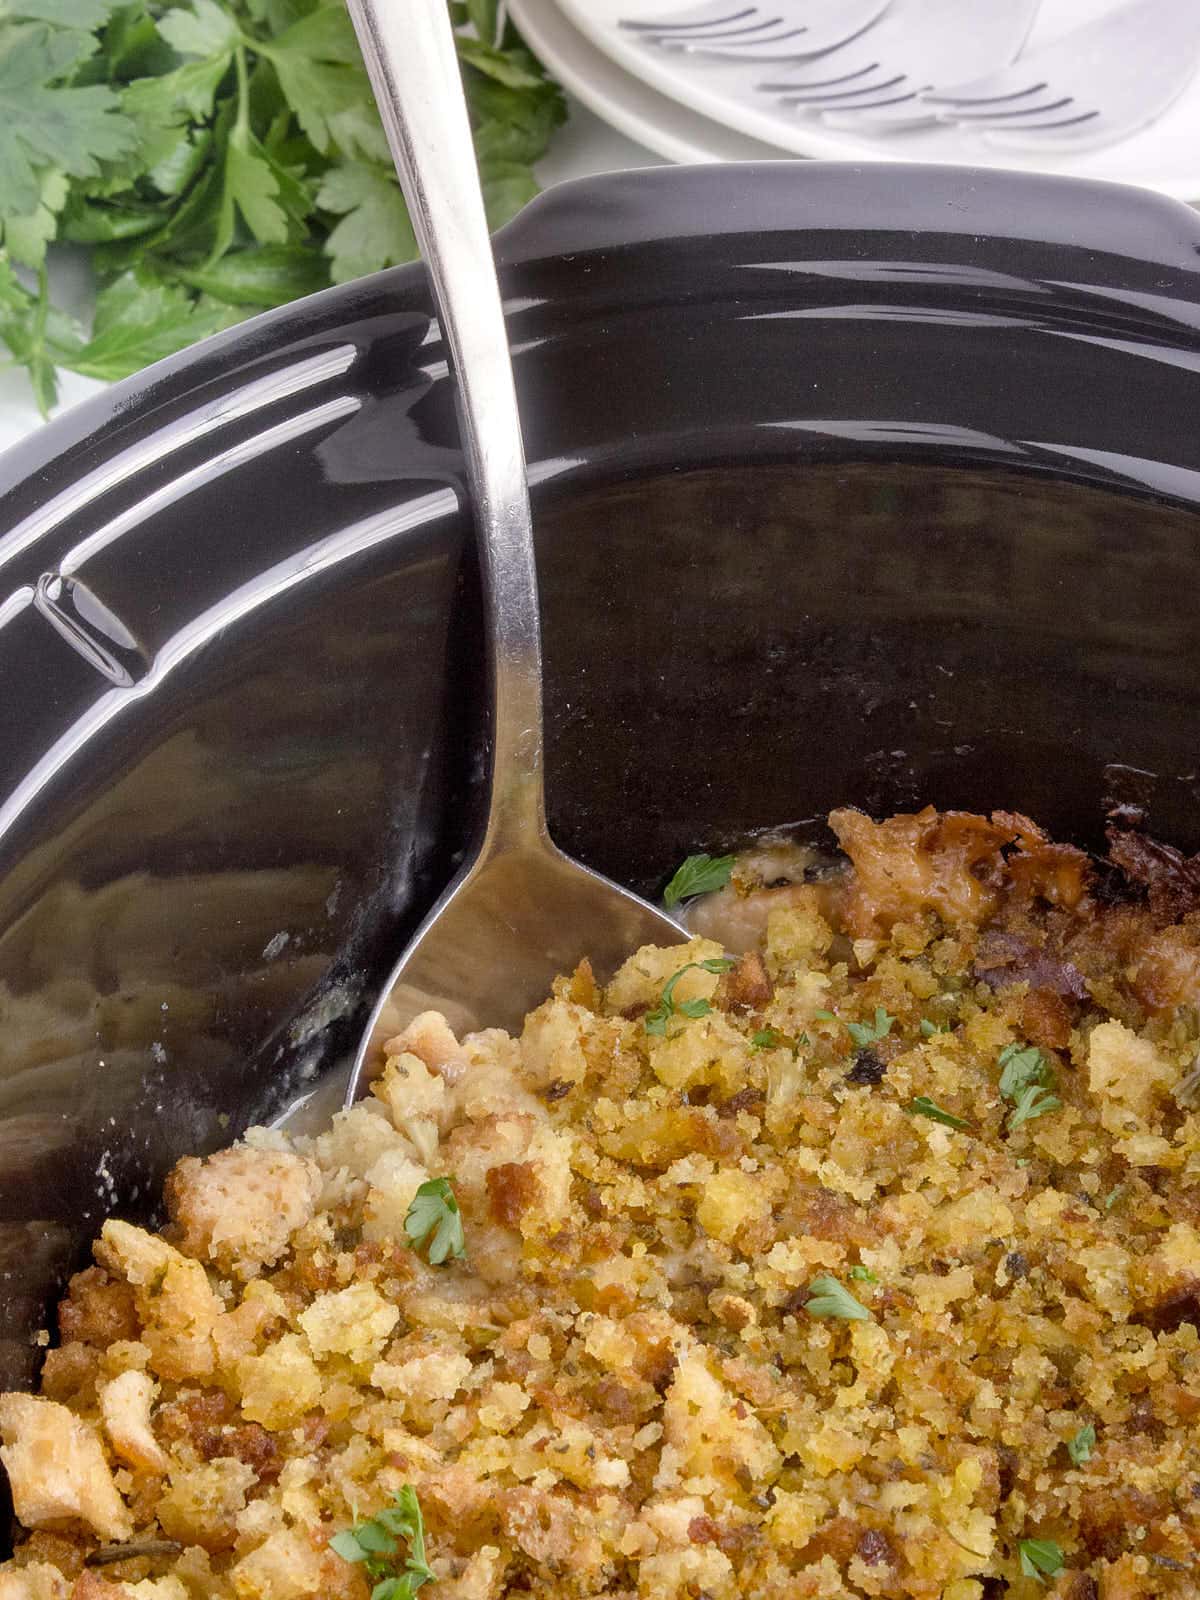 A large serving spoon digging into s slow cooker full of cooked Chicken with stuffing.